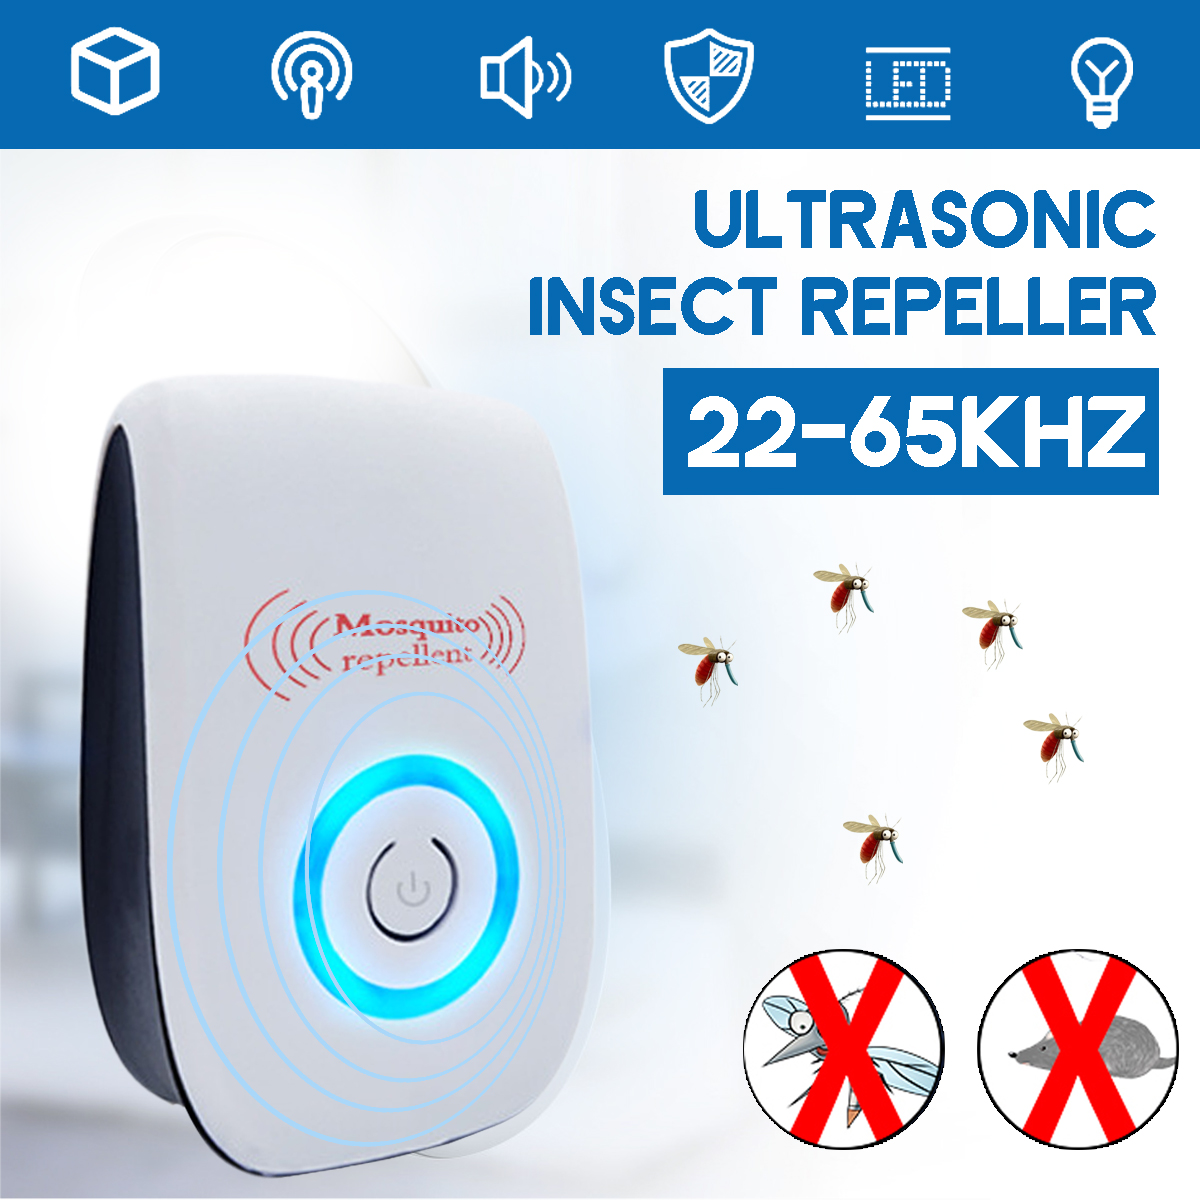 Ultrasonic-Electronic-Pests-Insect-Repeller-Anti-mouse-Mosquito-Cockroach-Rodent-Insect-Control-Kill-1636108-1